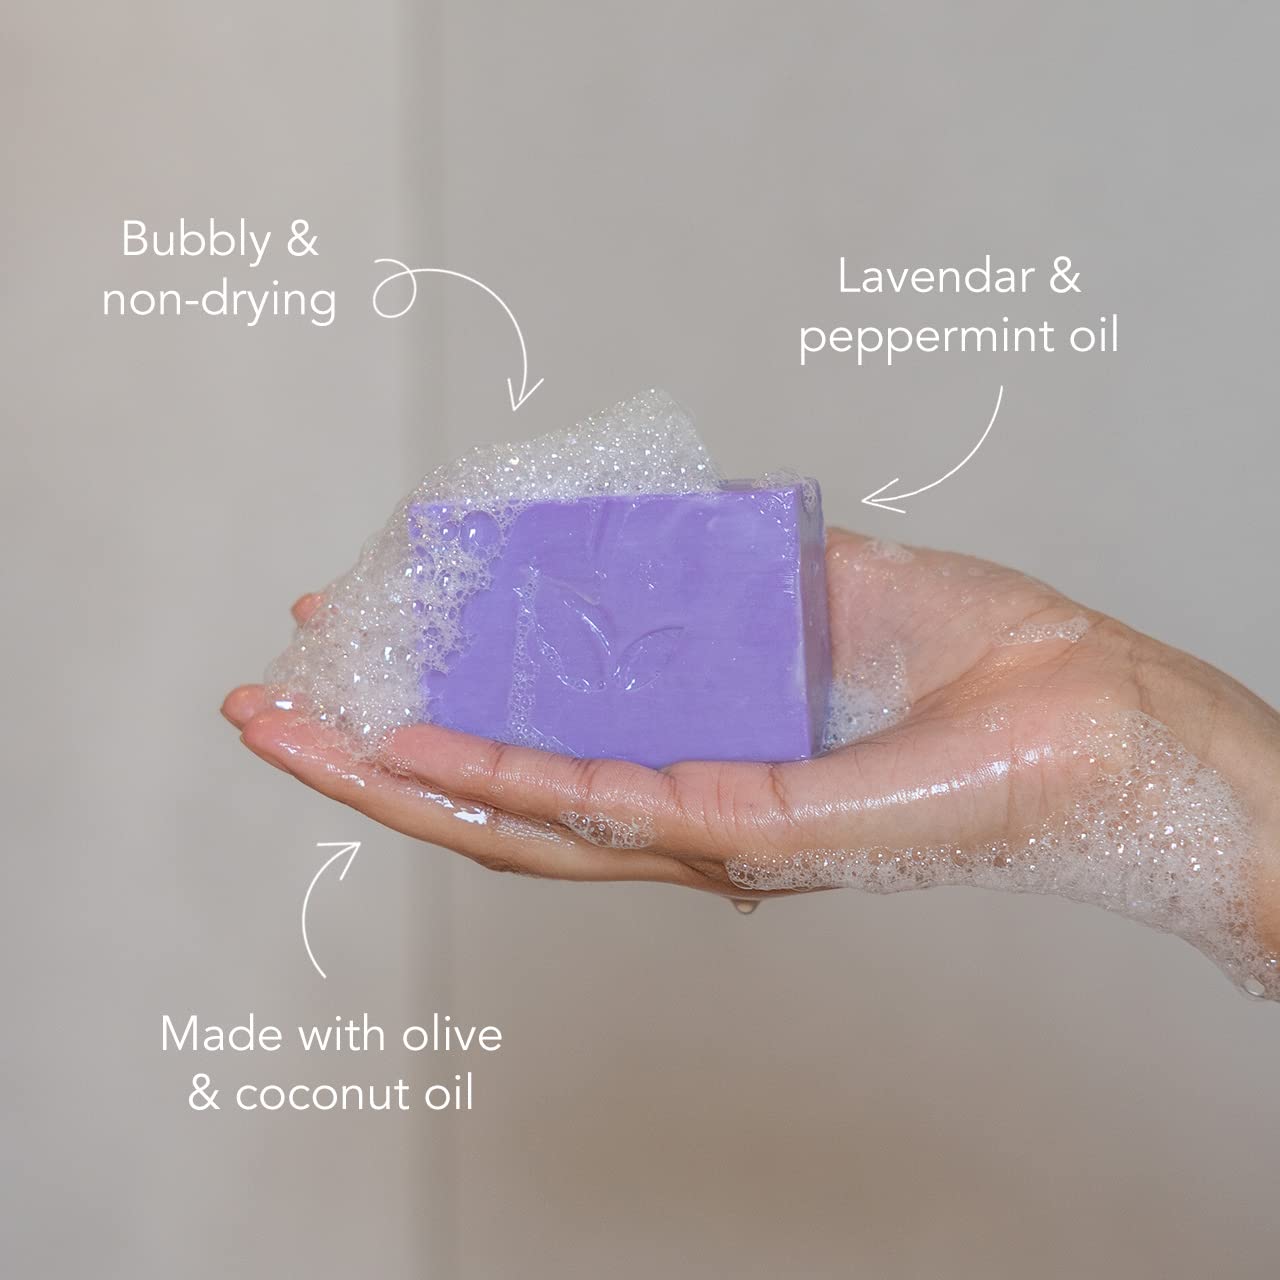 Ethique Refreshing Lavender & Peppermint Soap Bar - Body Wash for All Skin Types - Plastic-Free, Vegan, Cruelty-Free, Eco-Friendly, 4.23 oz (Pack of 1) : Beauty & Personal Care